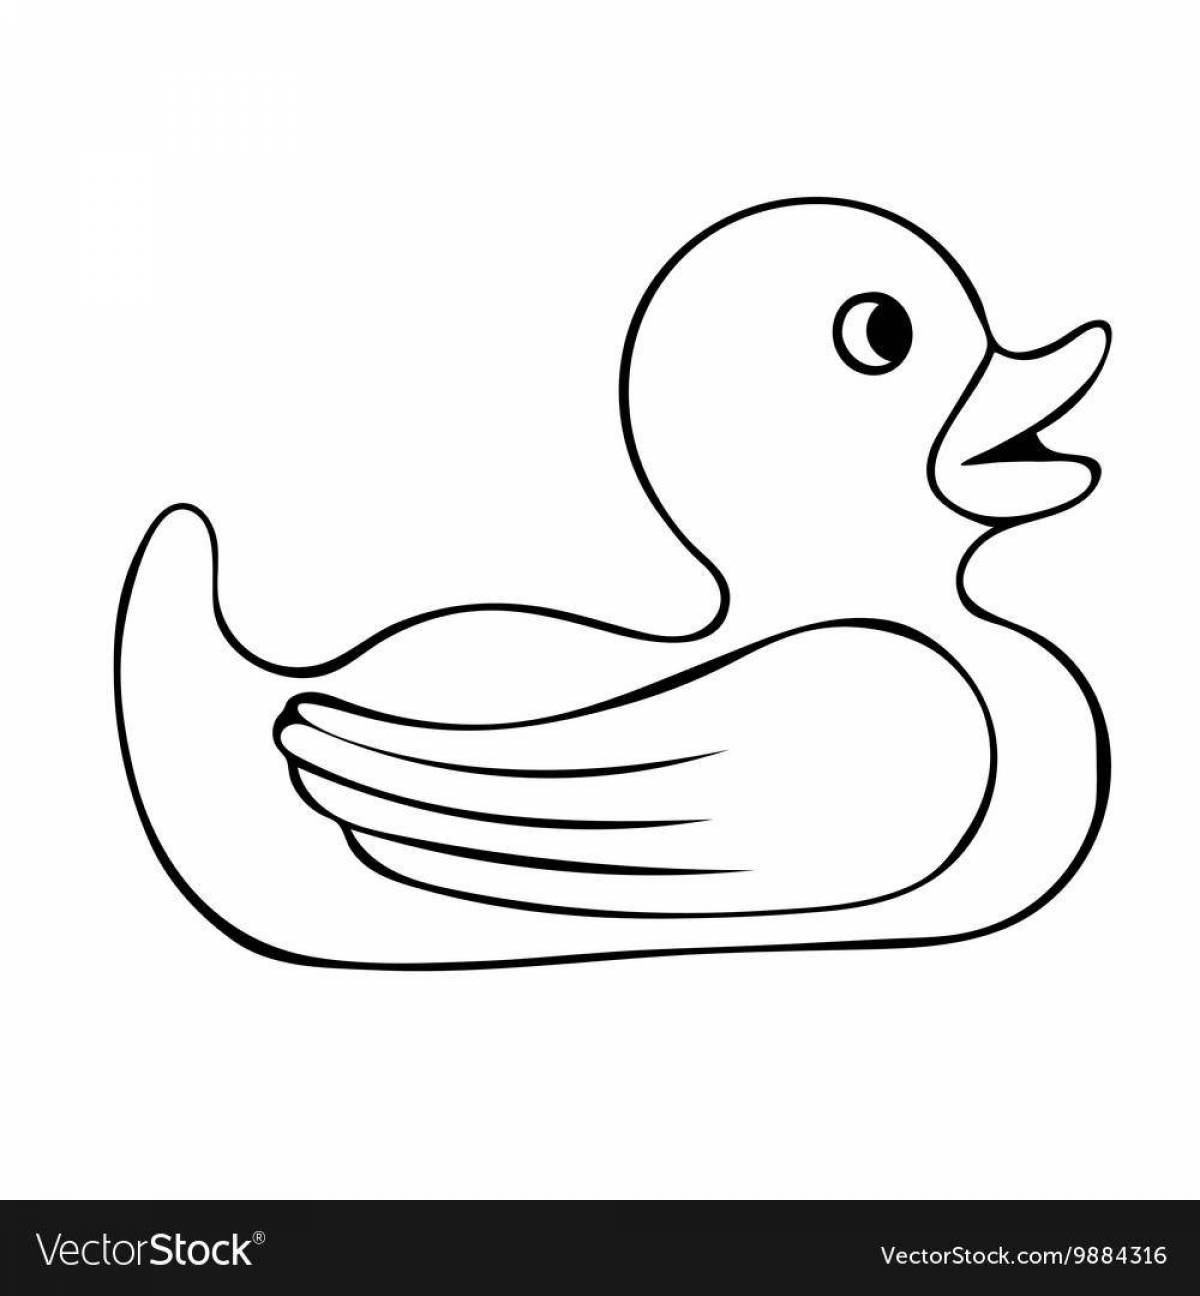 Coloring page stylish cosmetics for ducks